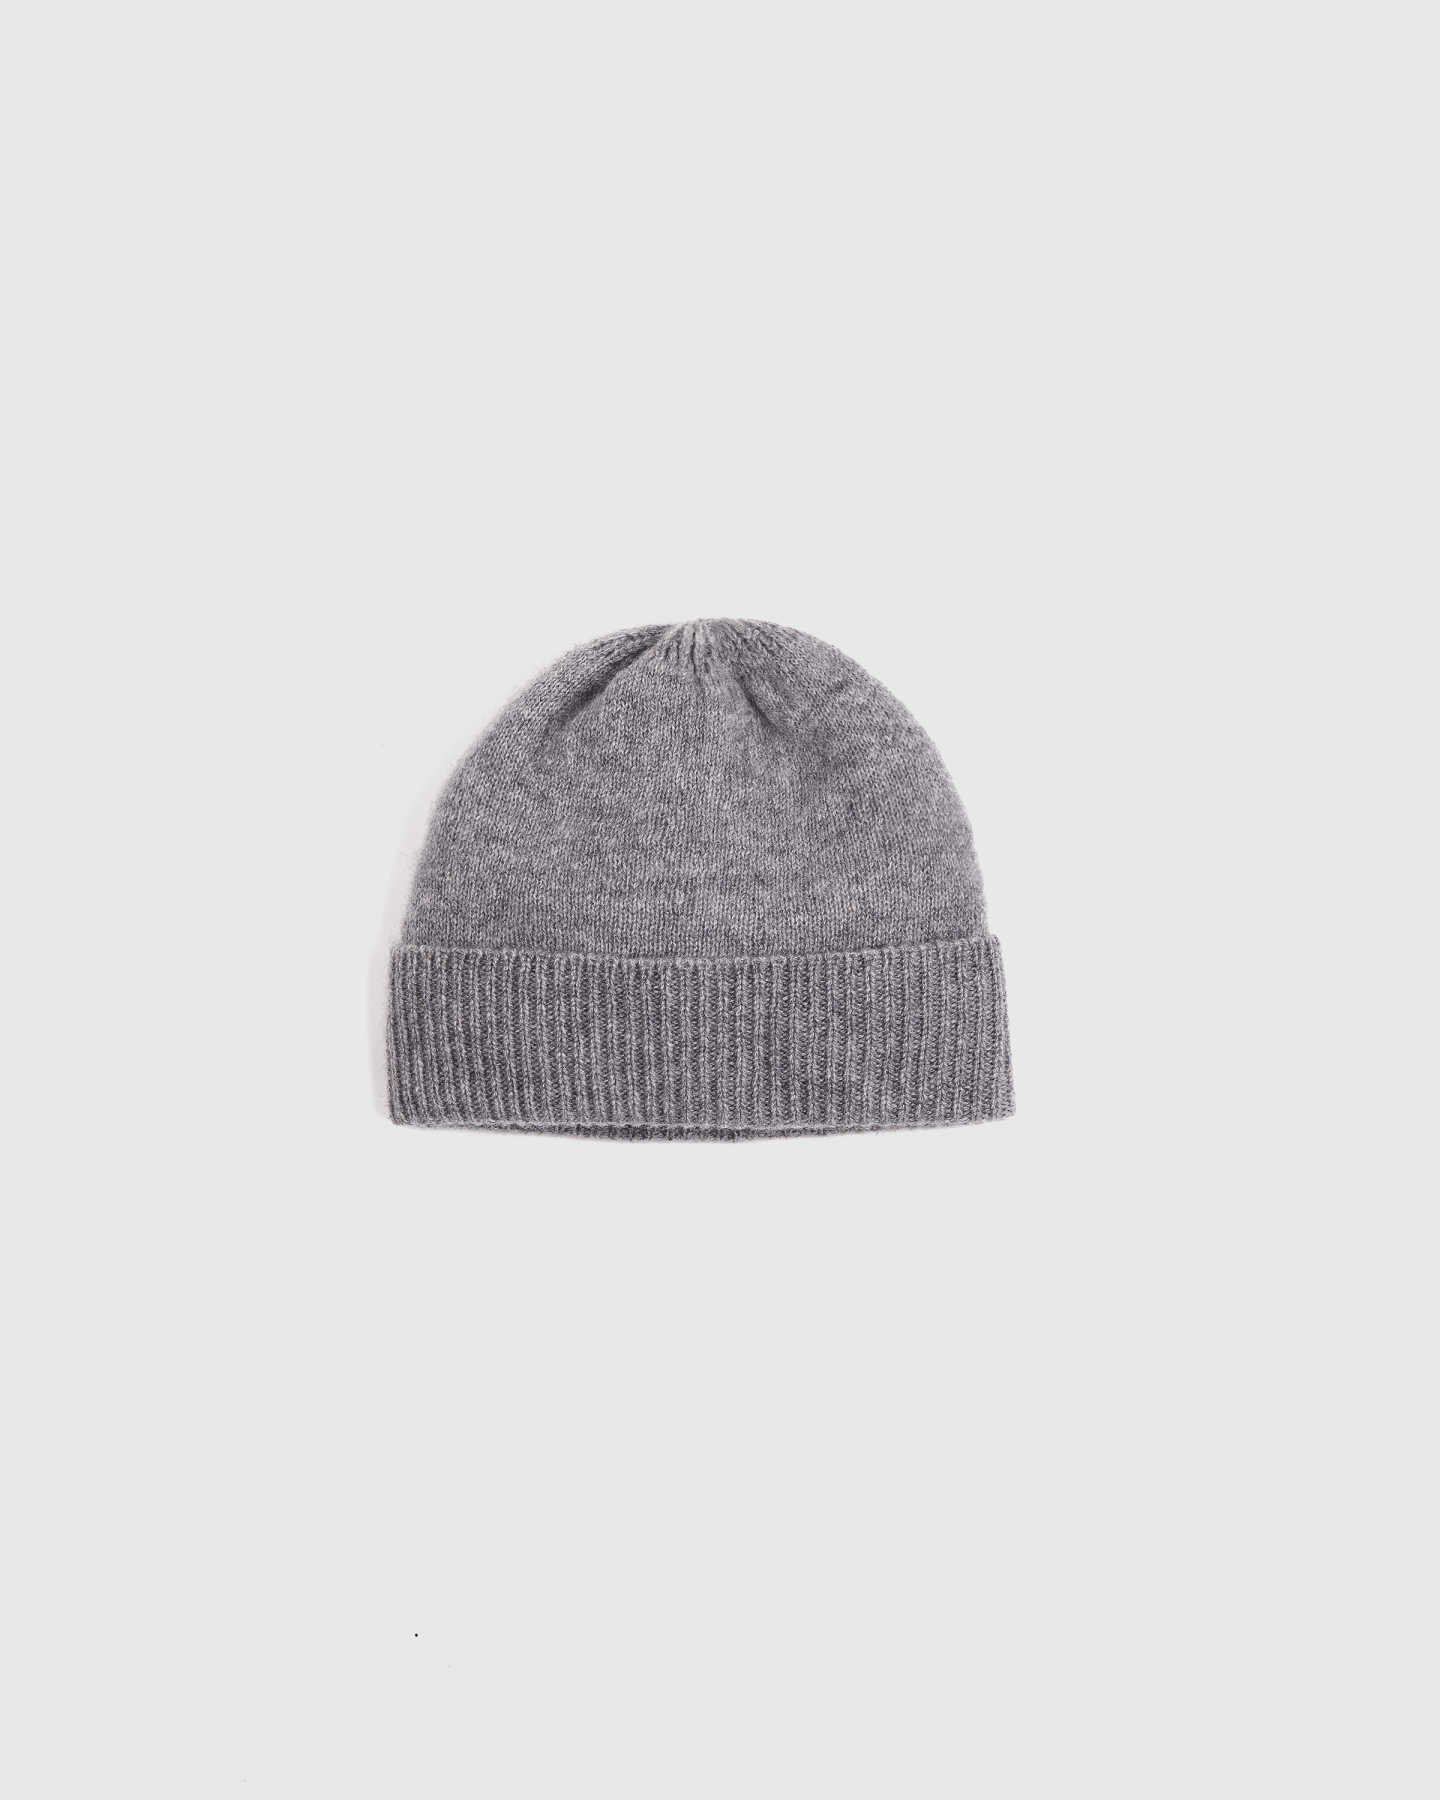 You May Also Like - Mongolian Cashmere Toddler Beanie - Heather Grey